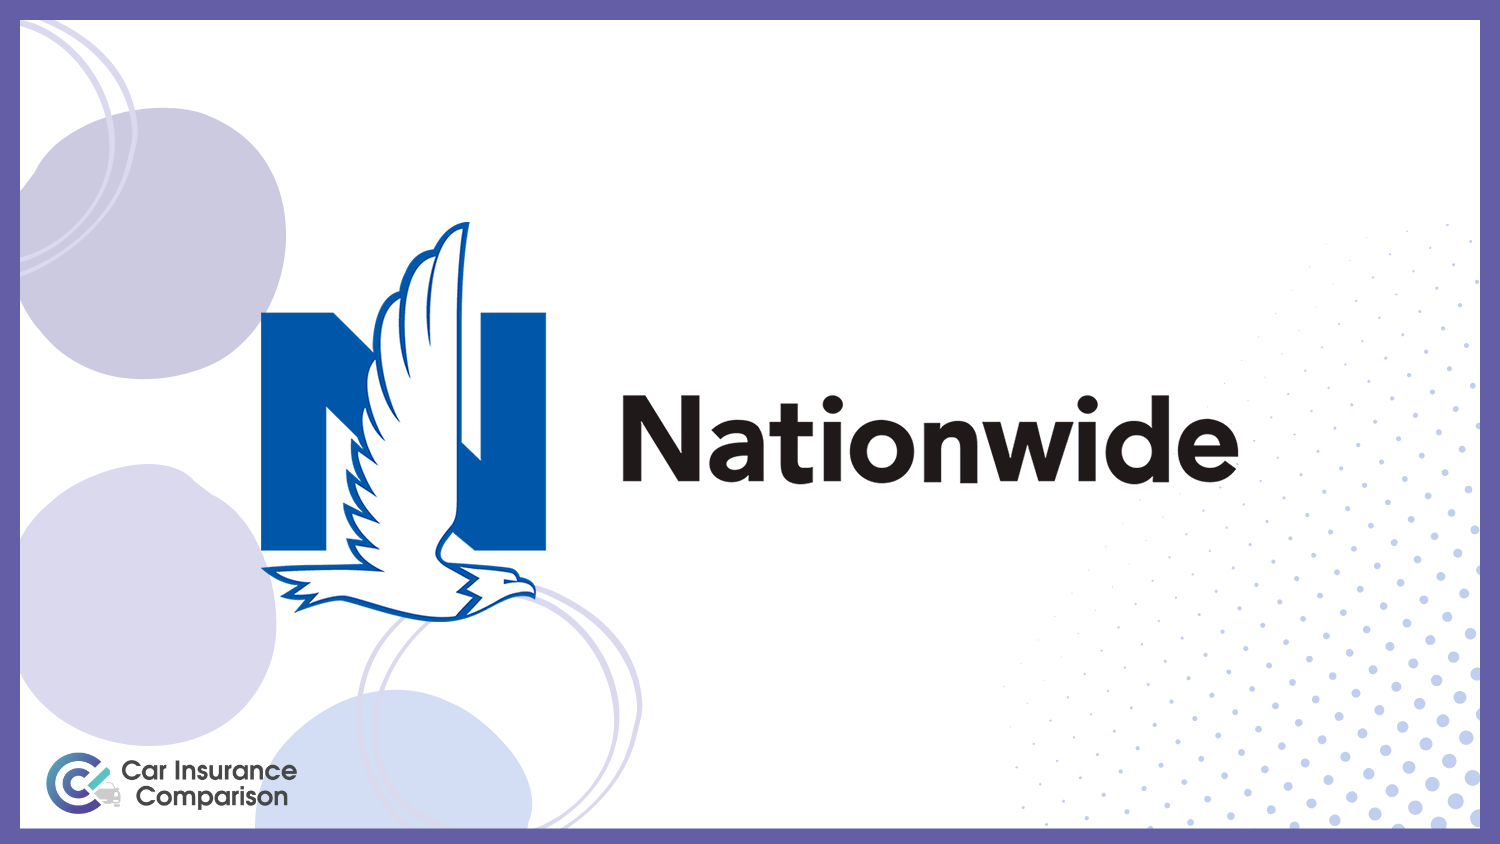 Nationwide: Best Car Insurance for Diplomats